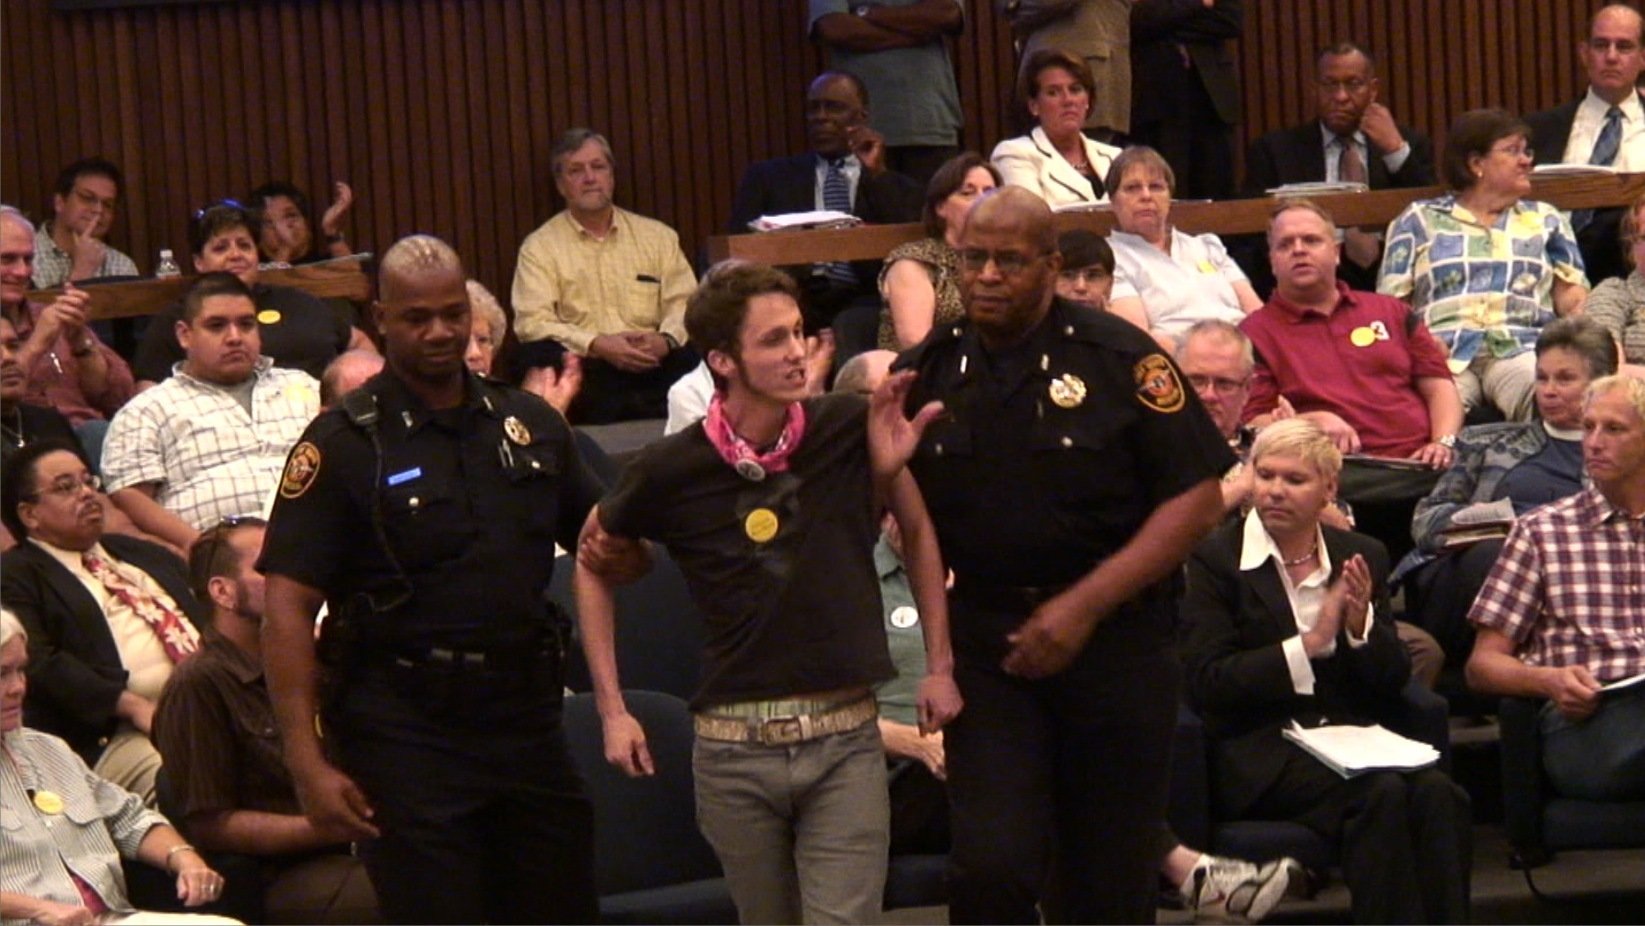 Queer LiberAction founder Blake Wilkinson escorted out of Fort Worth City Council Chambers after heated exchange with Mayor Mike Moncrief. From documentary 